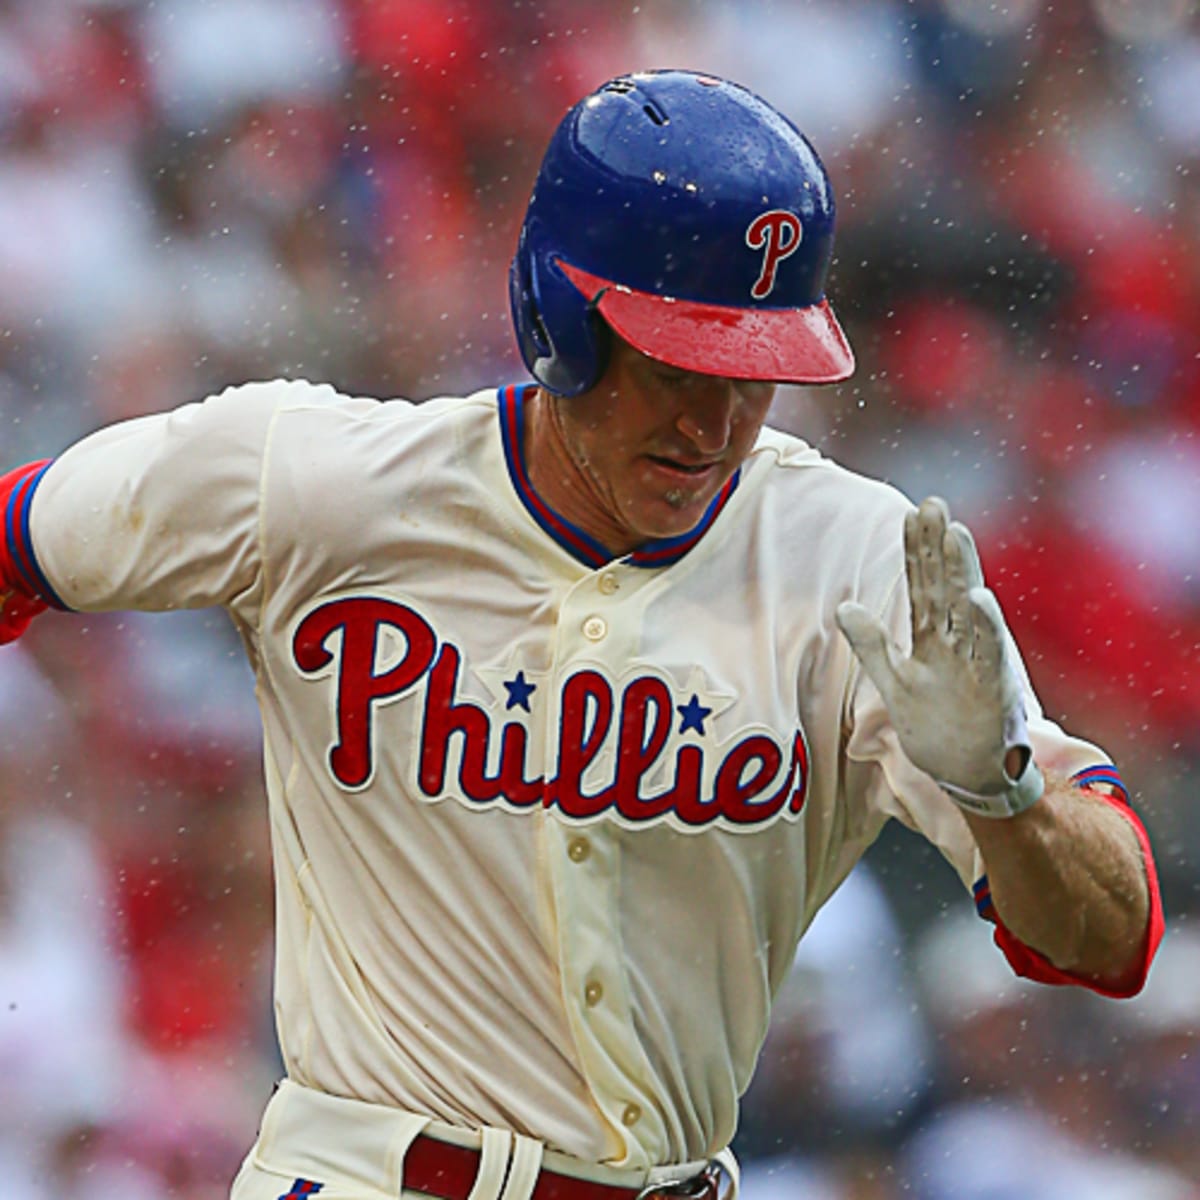 Utley and Howard hanging on with rebuilding Phillies